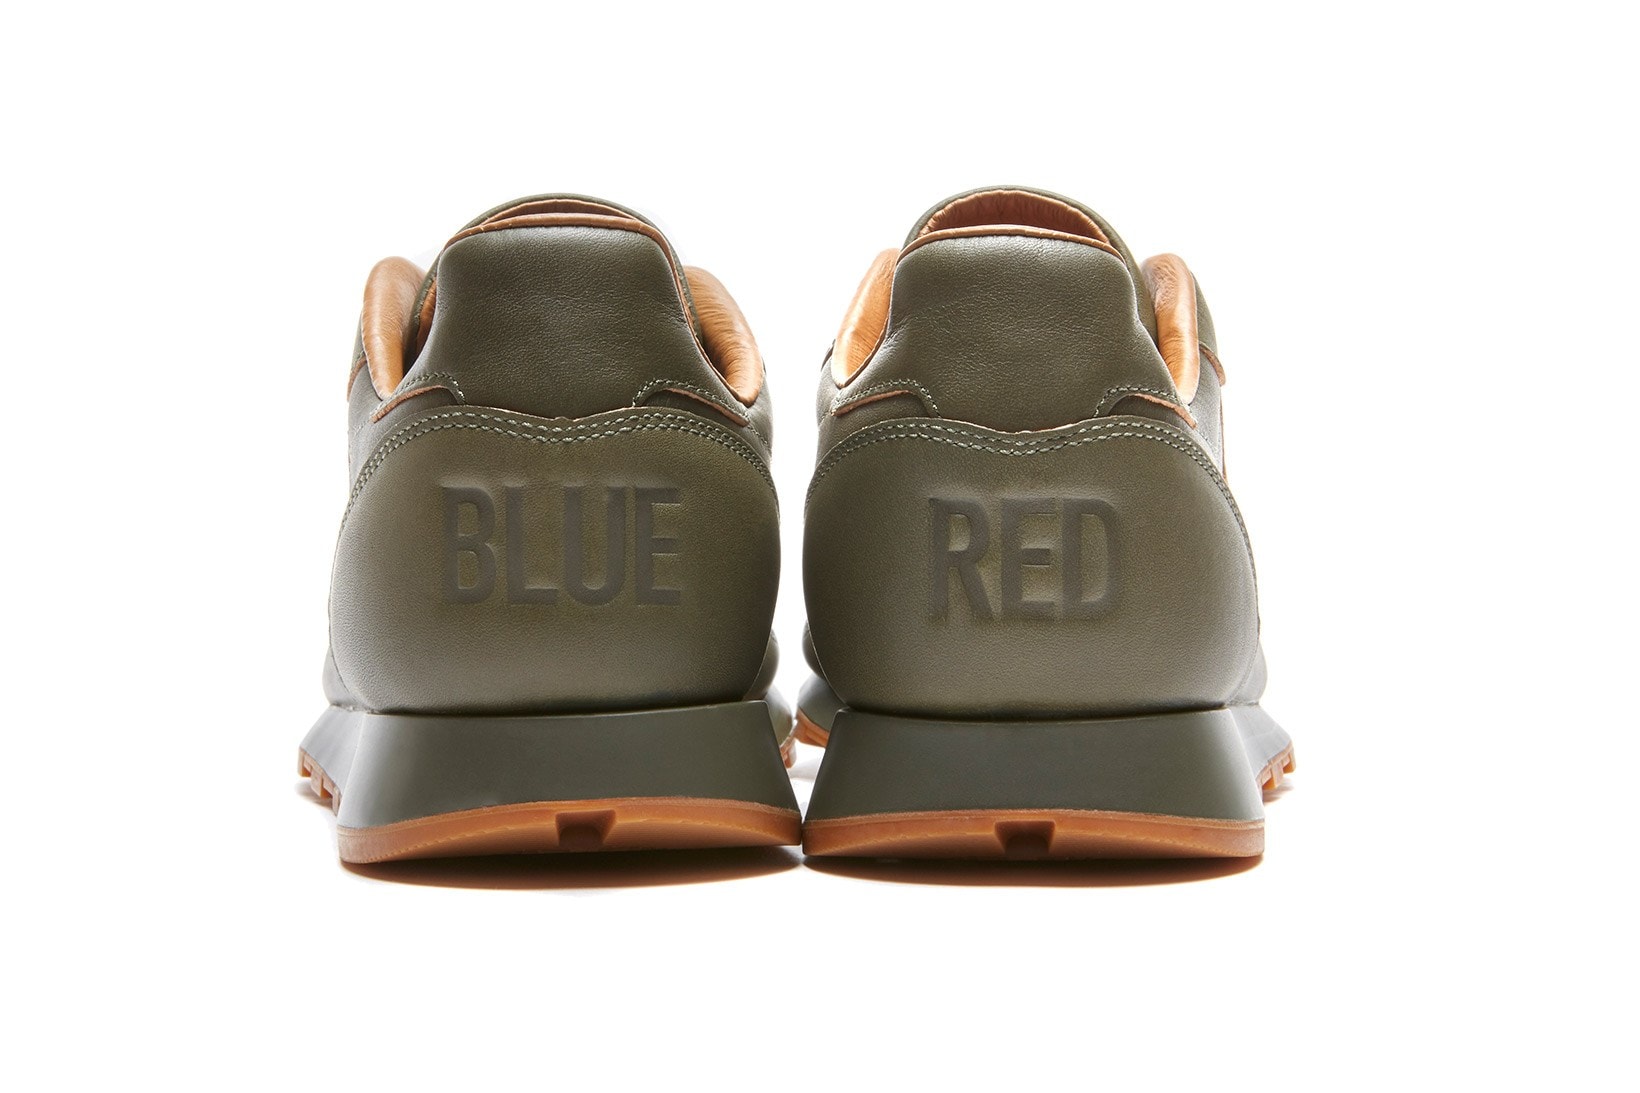 Kendrick Lamar x Reebok Classic "Red and Blue" Collection